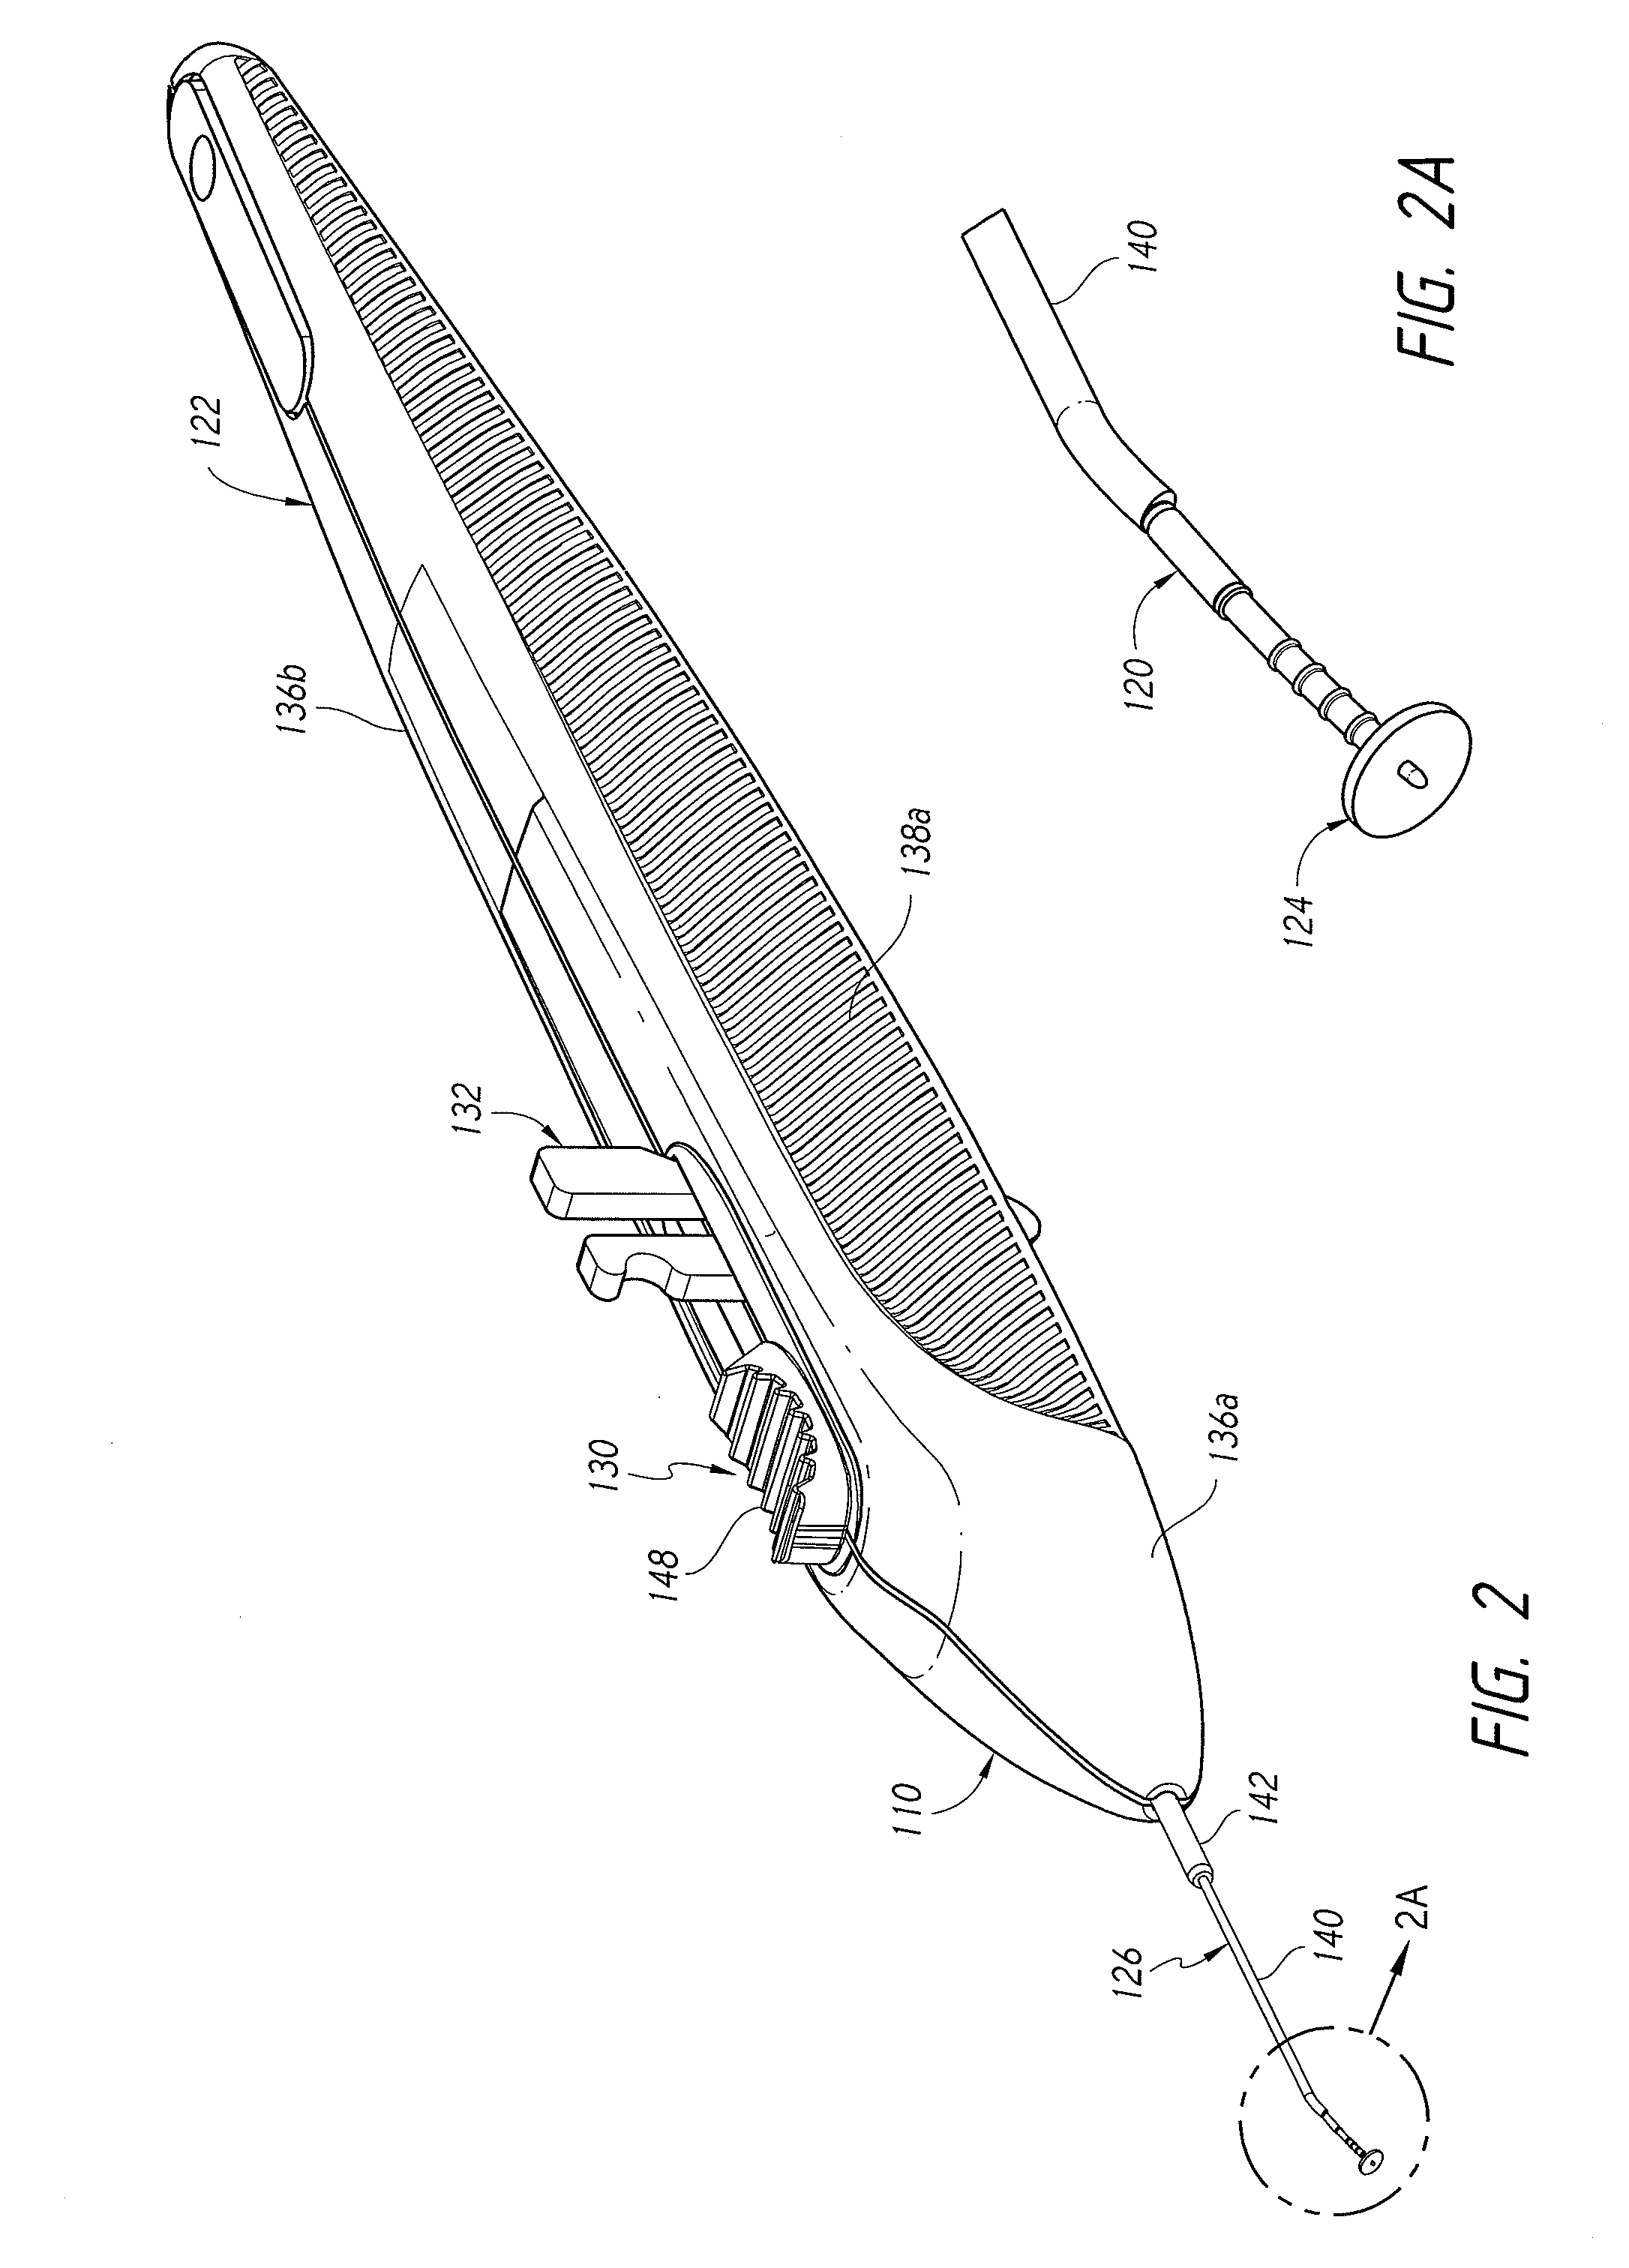 Systems and methods for delivering an ocular implant to the suprachoroidal space within an eye